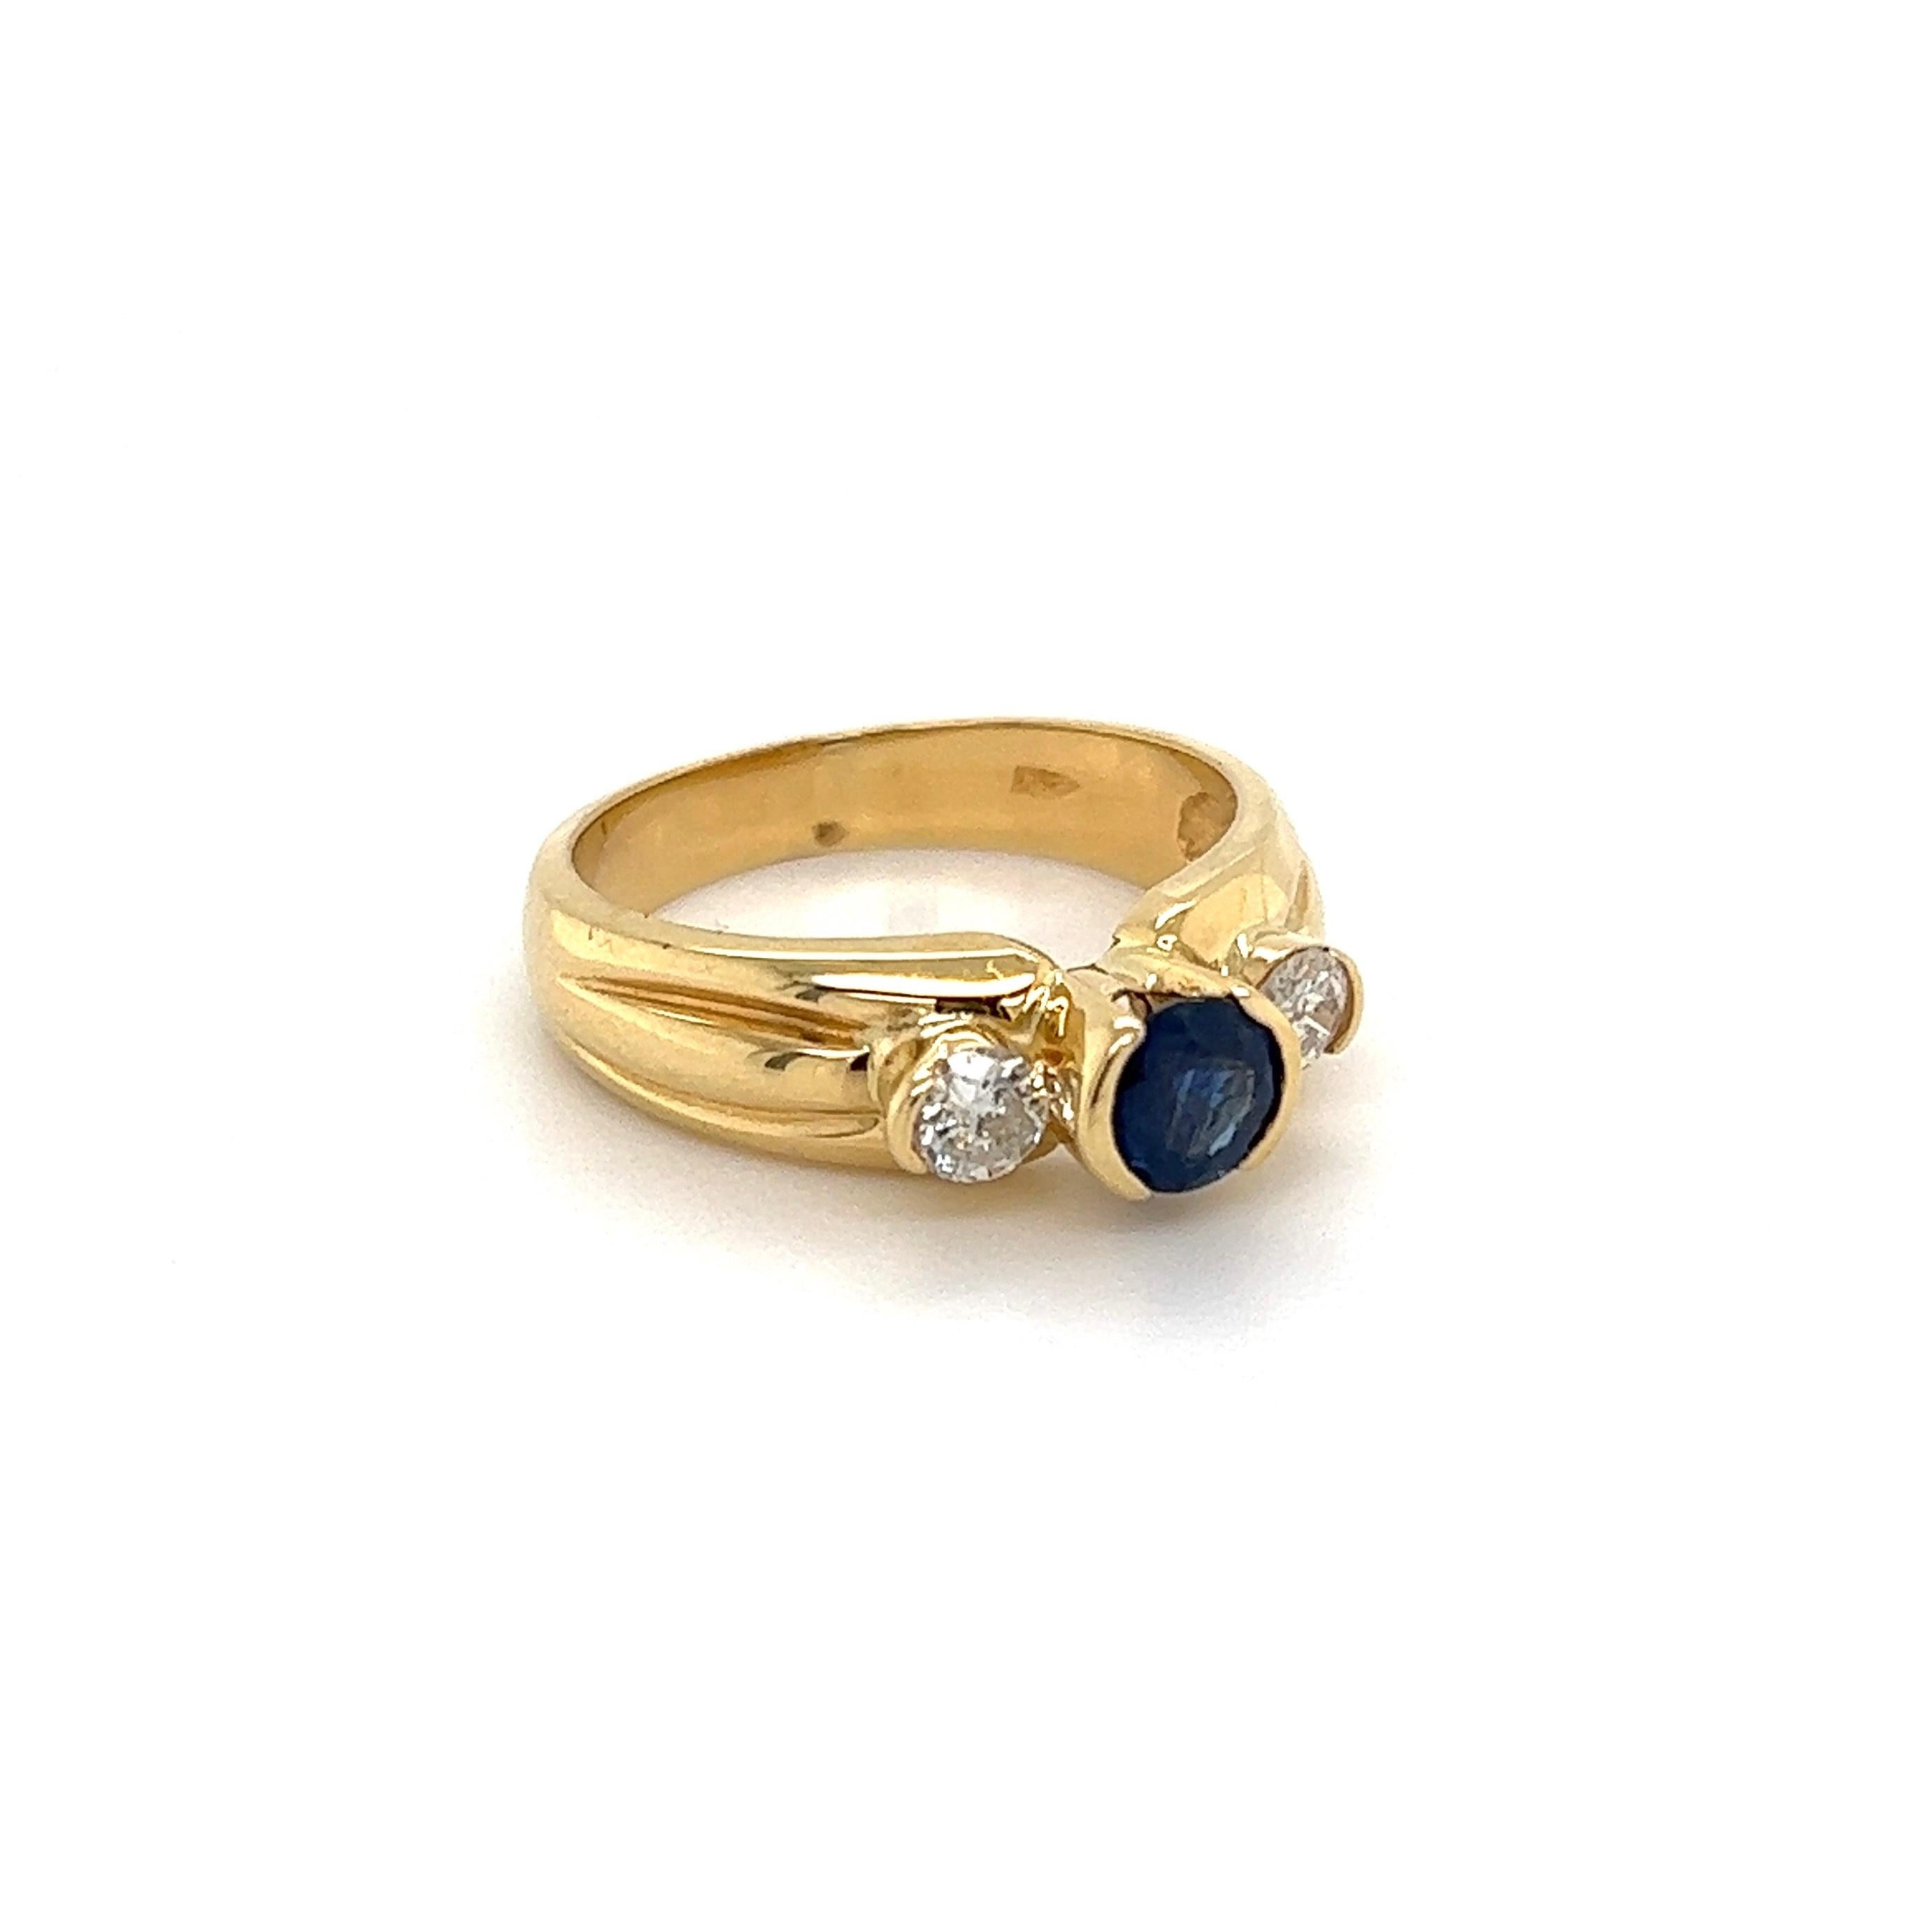 Beautiful finely detailed Gold Three-Stone Blue Sapphire and Diamond Trilogy Ring. Center securely nestled with a Hand set 0.50 Carat Round Sapphire and 2 Diamonds approx. 0.30tcw. Hand crafted 14K Yellow Gold mounting. Approx. dimensions: 0.98